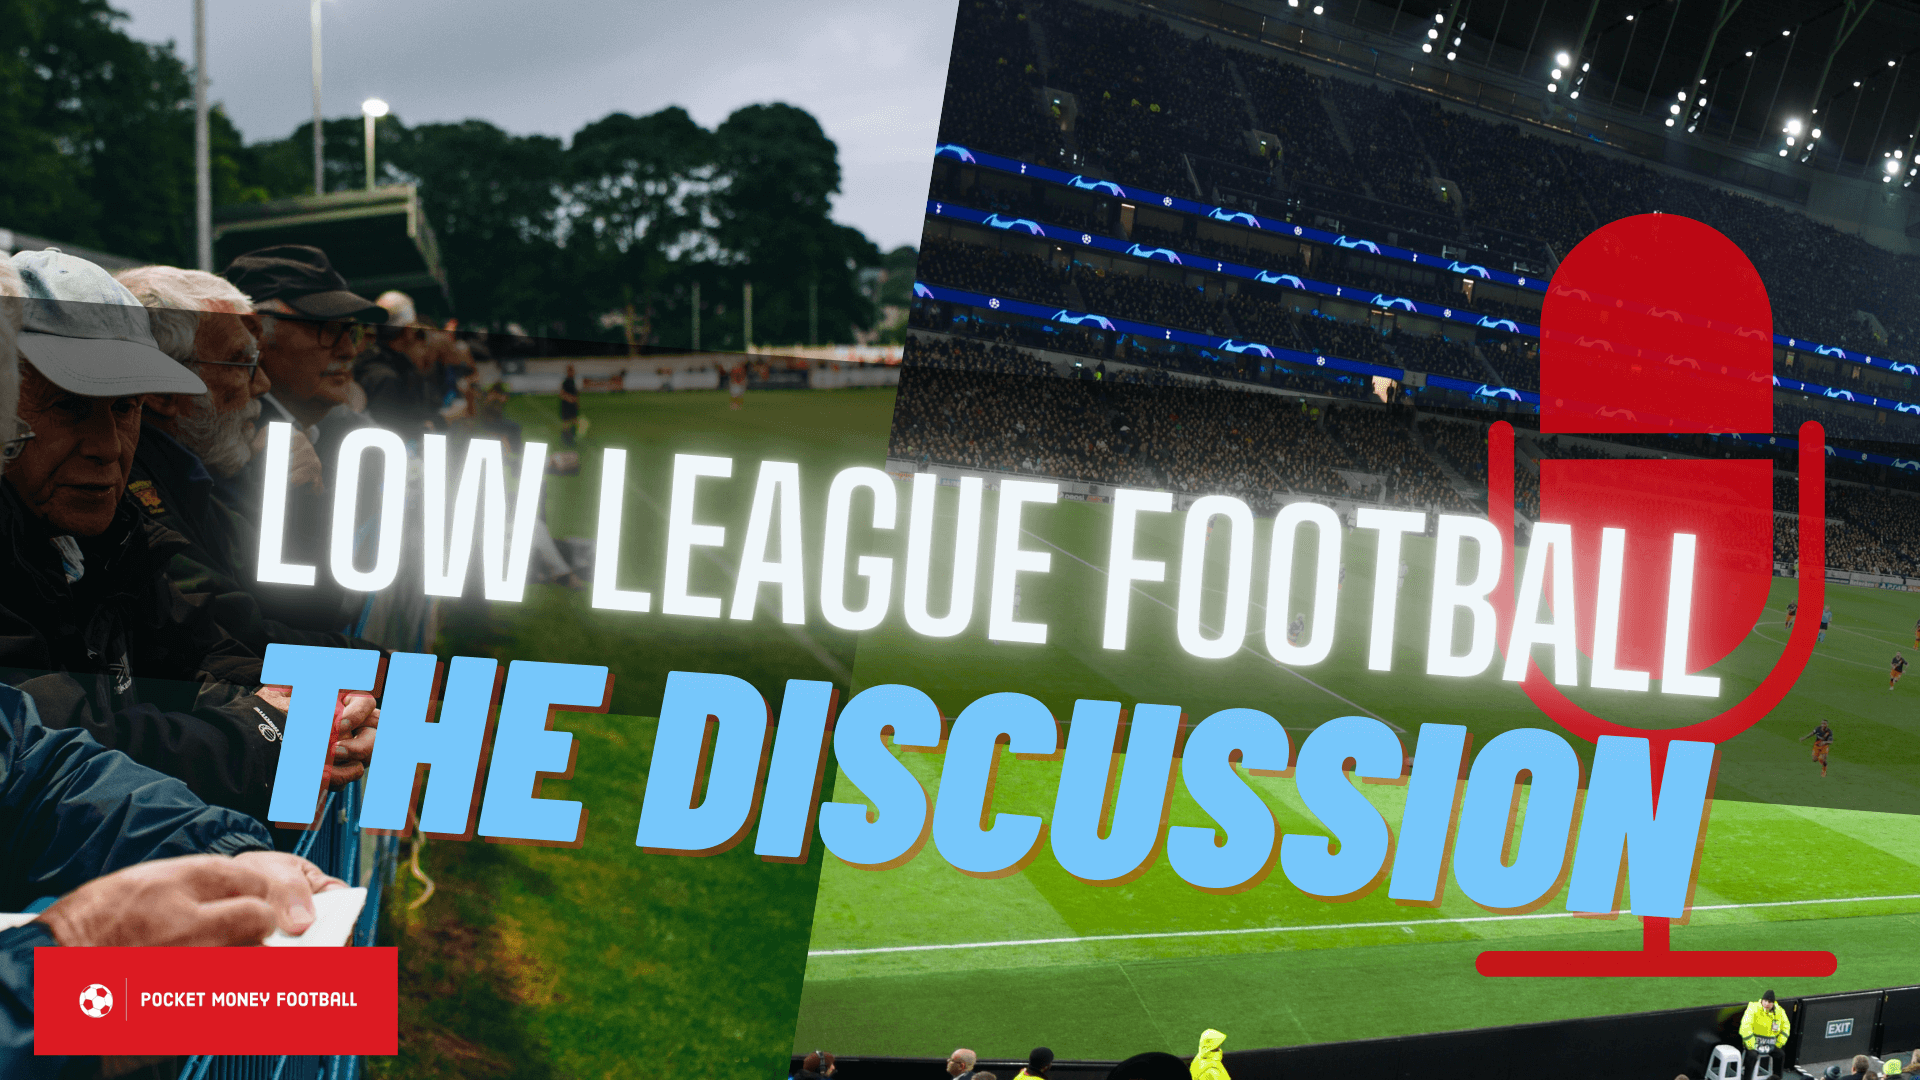 Low League Football: The Discussion on Pocket Money Football